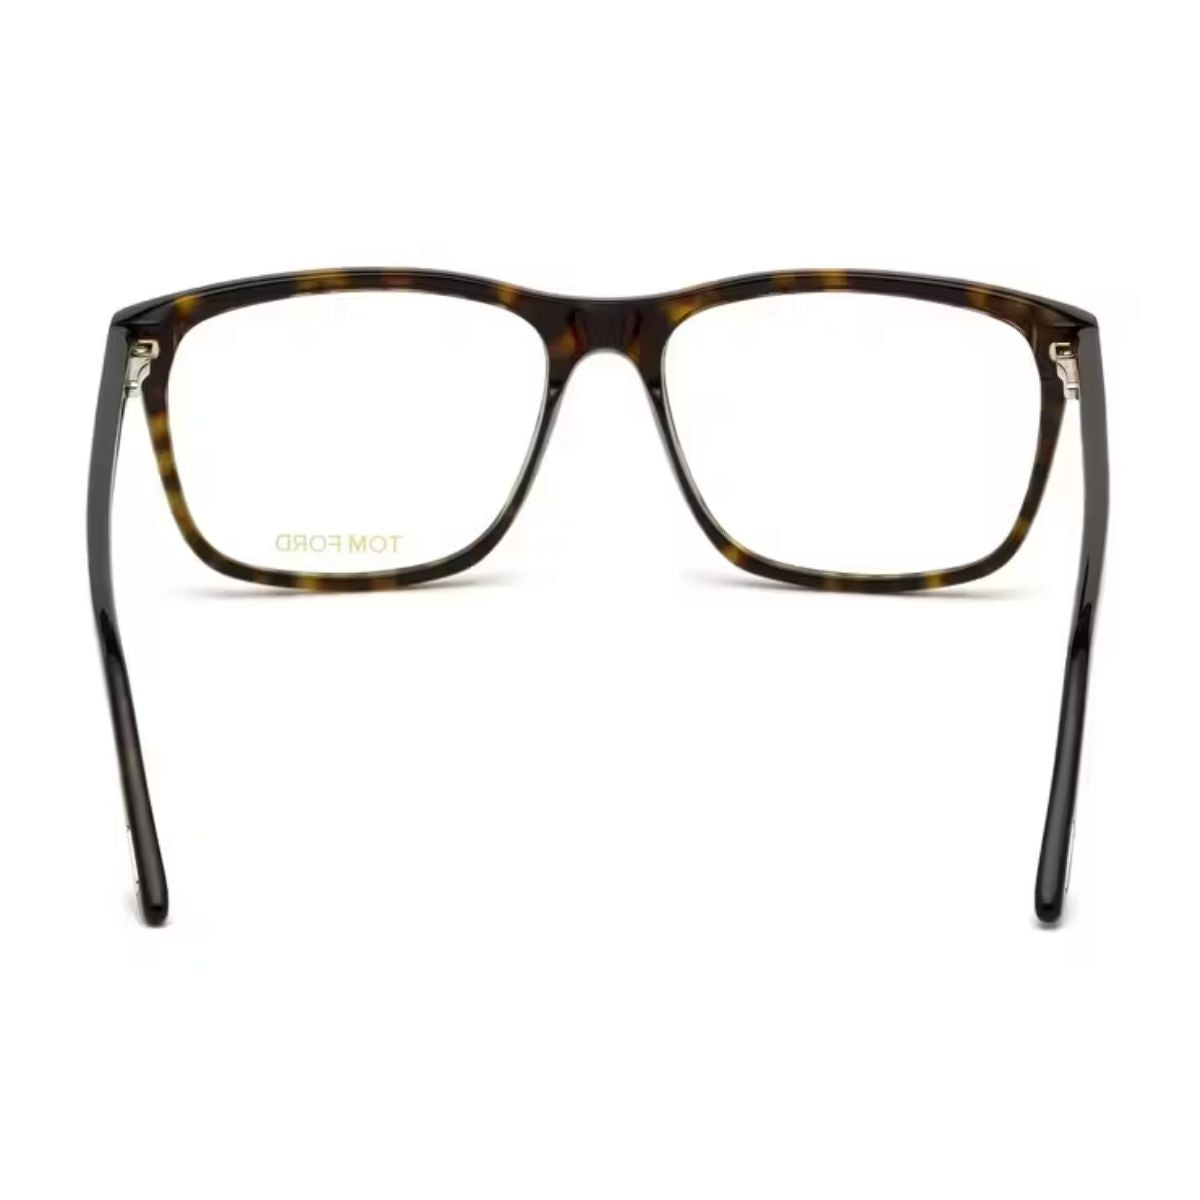 "Shop Tom Ford TF 5479 052 Havana square optical glasses for men at Optorium. Enjoy free shipping all over India on branded eyewear."